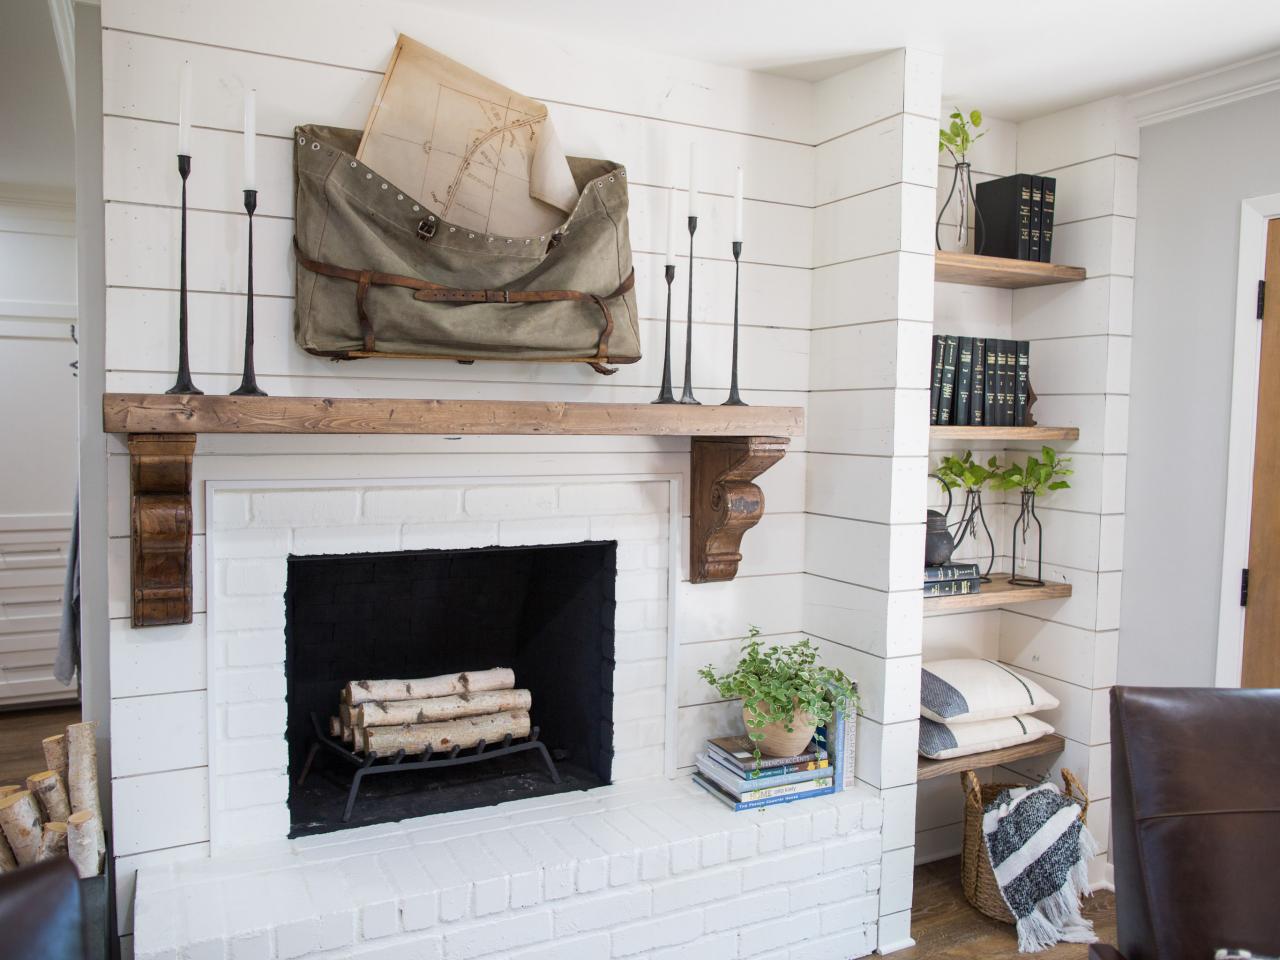 Books and plants in a house on HGTV's 'Fixer Upper'